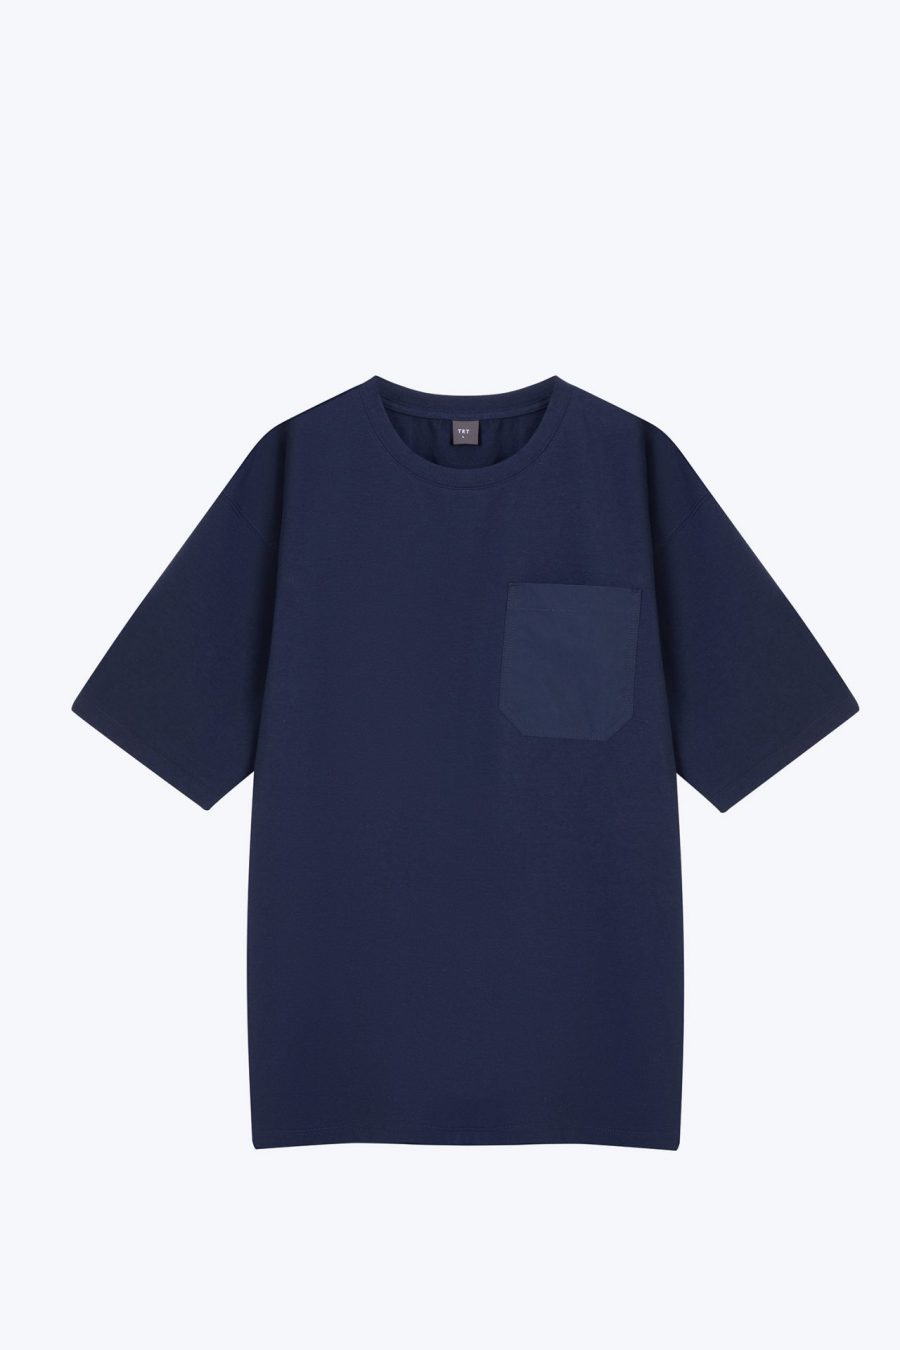 MT900200D RELAXED FIT PATCH POCKET TEE DARK NAVY